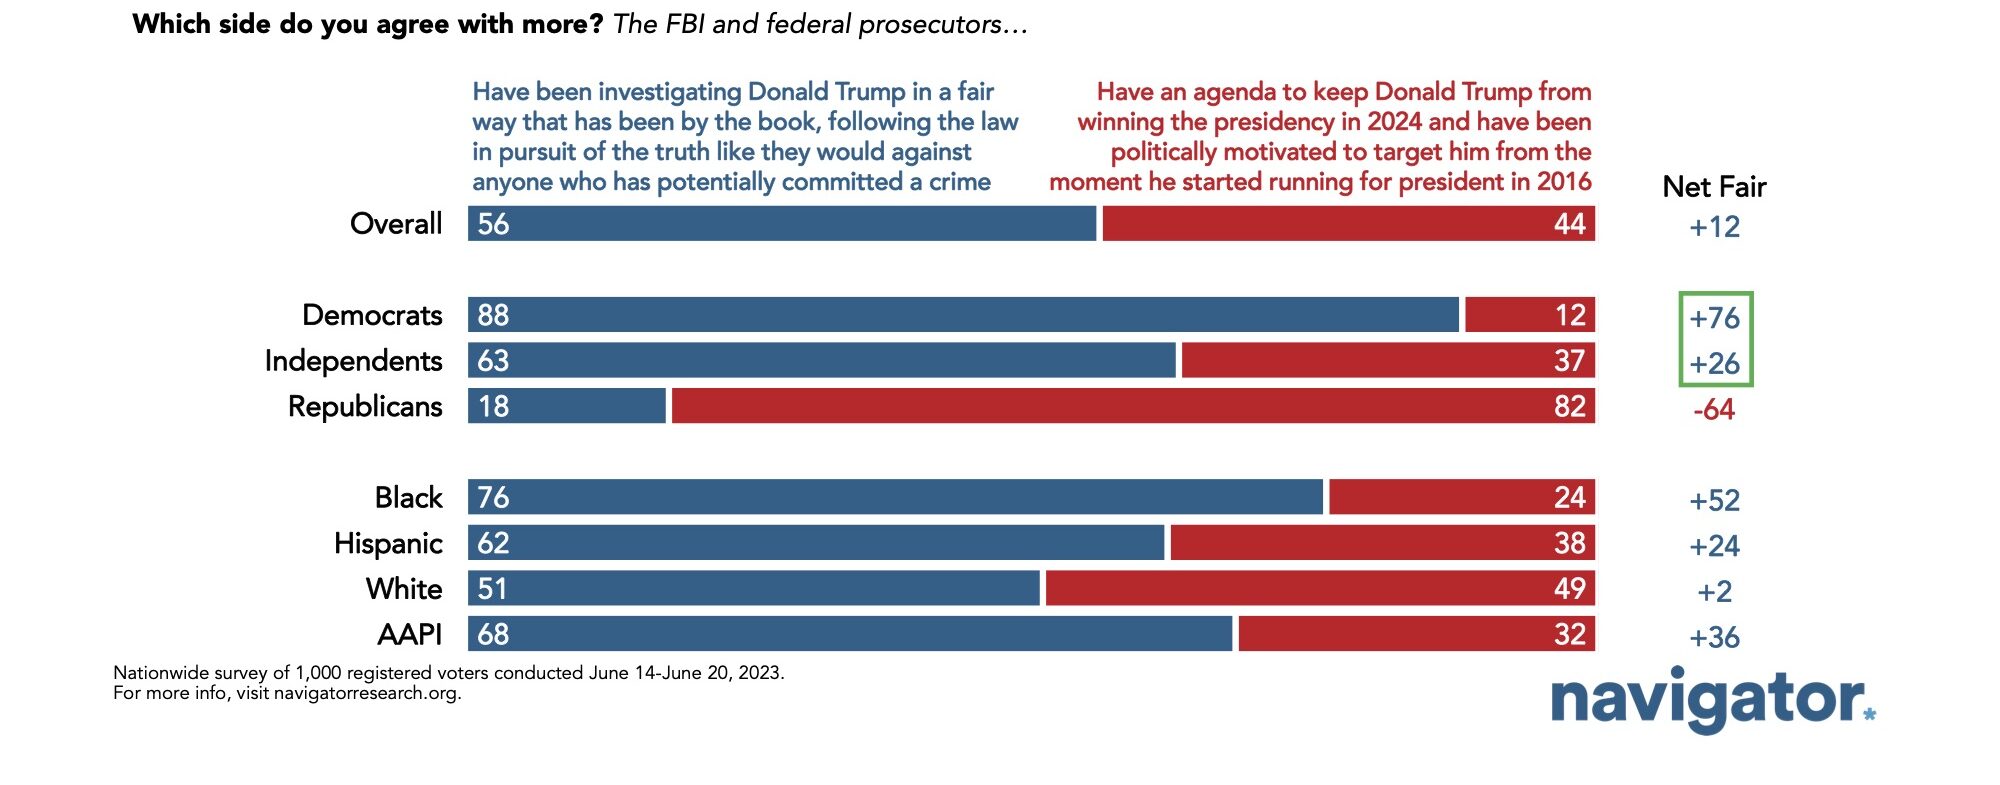 Bar graphs showing survey results to the following question after Donald Trump's indictment: Which side do you agree with more? The FBI and federal prosecutors... A. Have been investigating Donald Trump in a fair way that has been by the book, following the law in pursuit of the truth like they would against anyone who has potentially committed a crime B. Have an agenda to keep Donald Trump from winning the presidency in 2024 and have been politically motivated to target him from the moment he started running for president in 2016